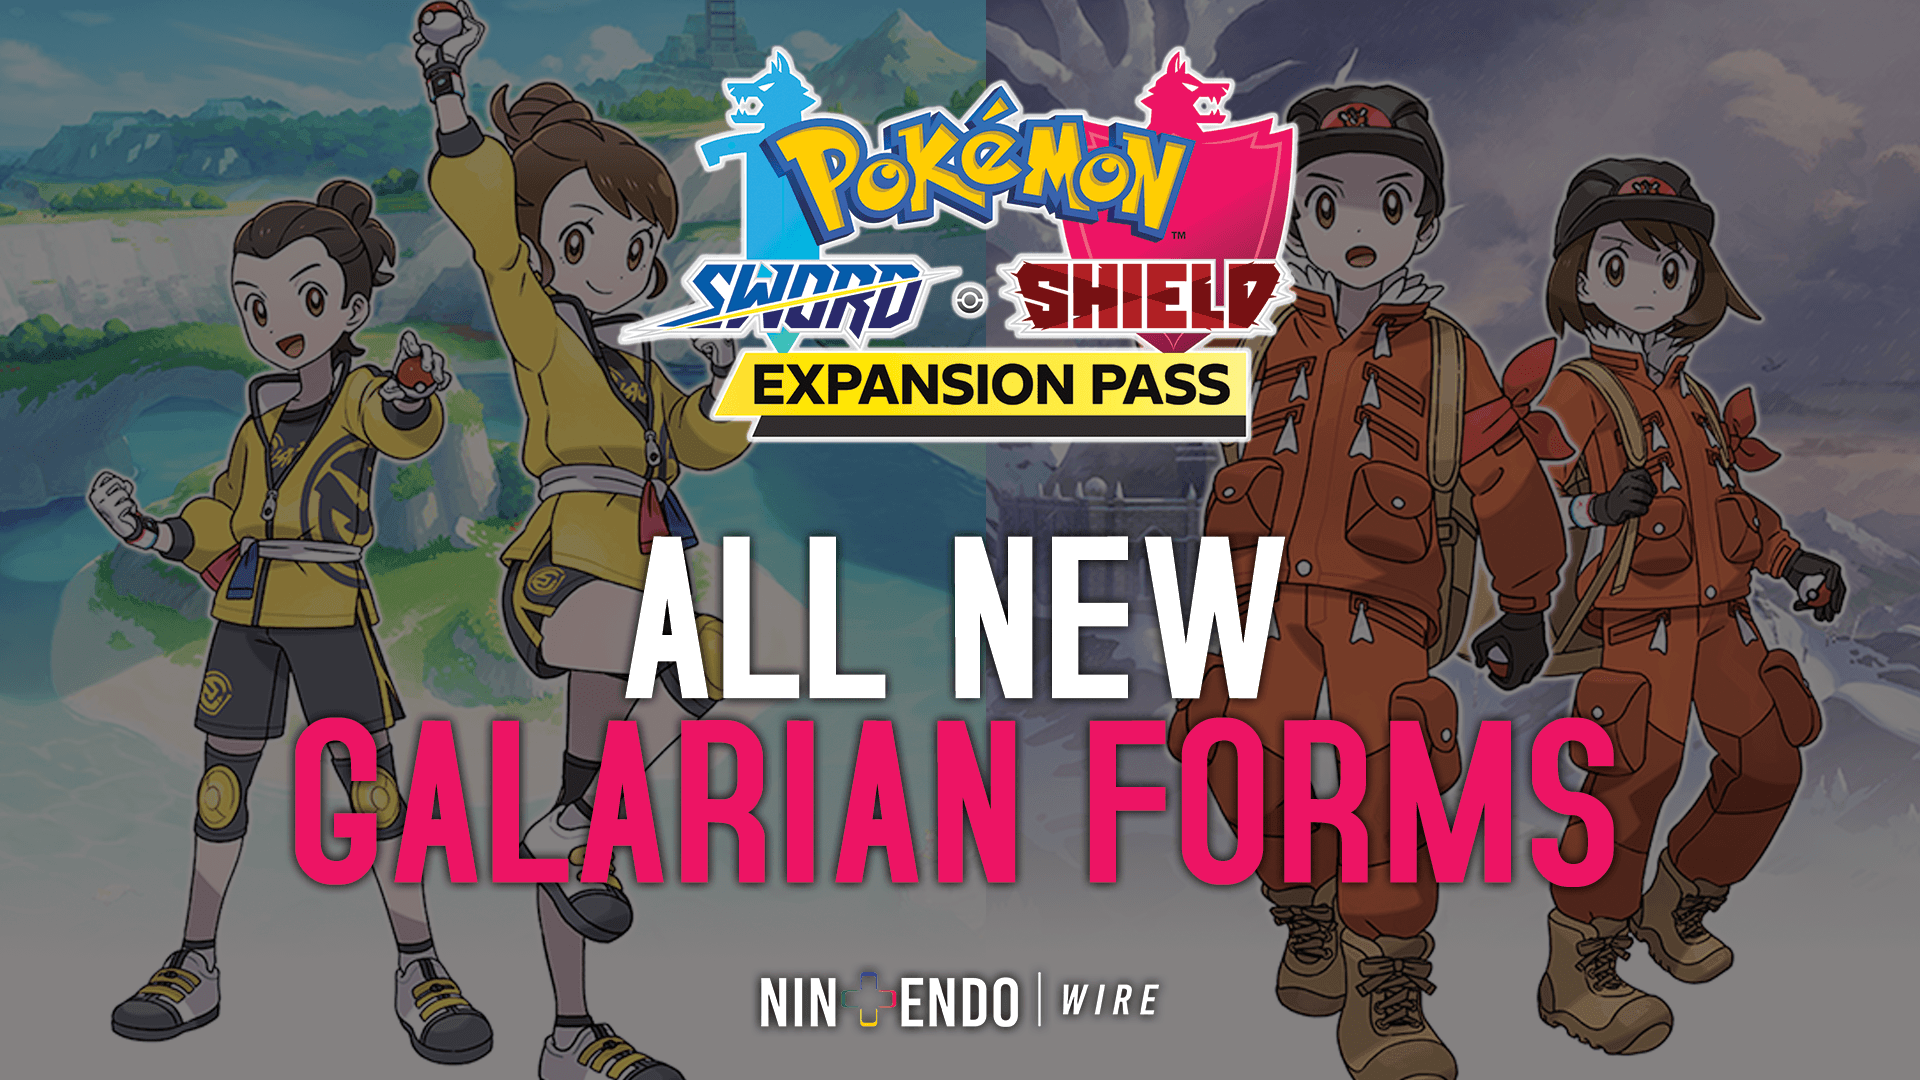 Guide New Galarian Forms In Pokemon Sword Shield S Expansion Pass